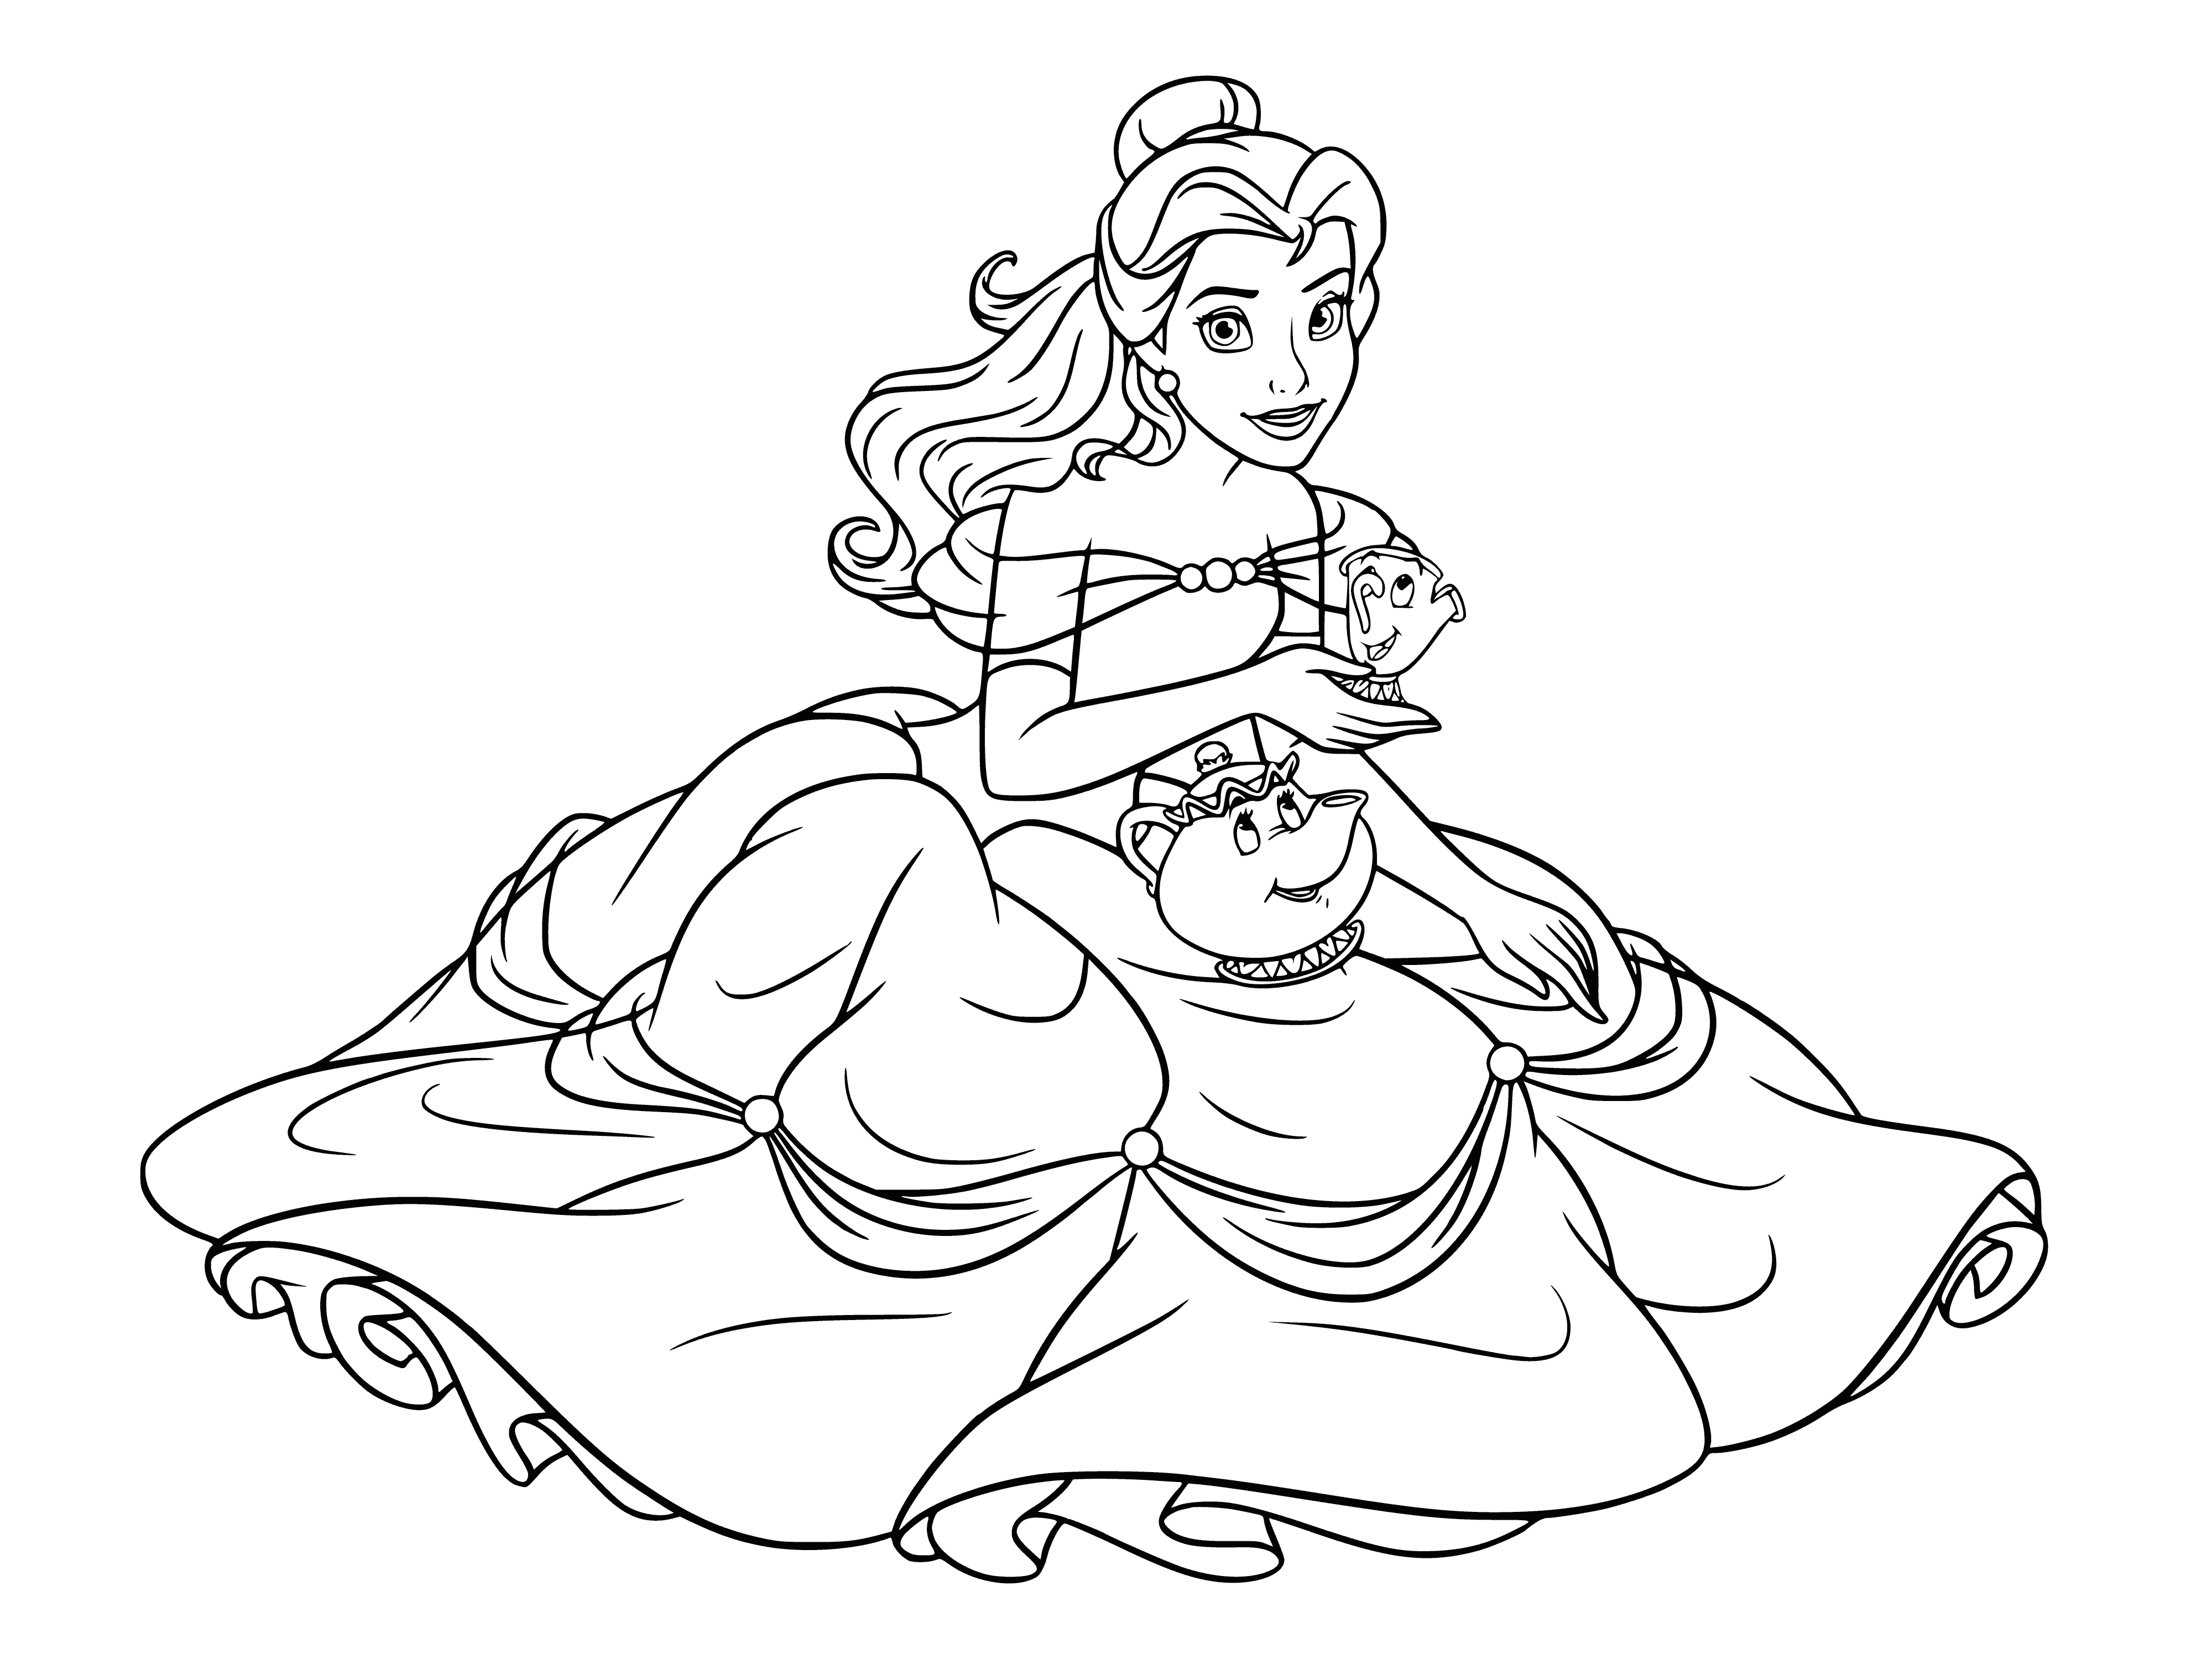 Belle, Mrs. Potts and Chip. Belle coloring page